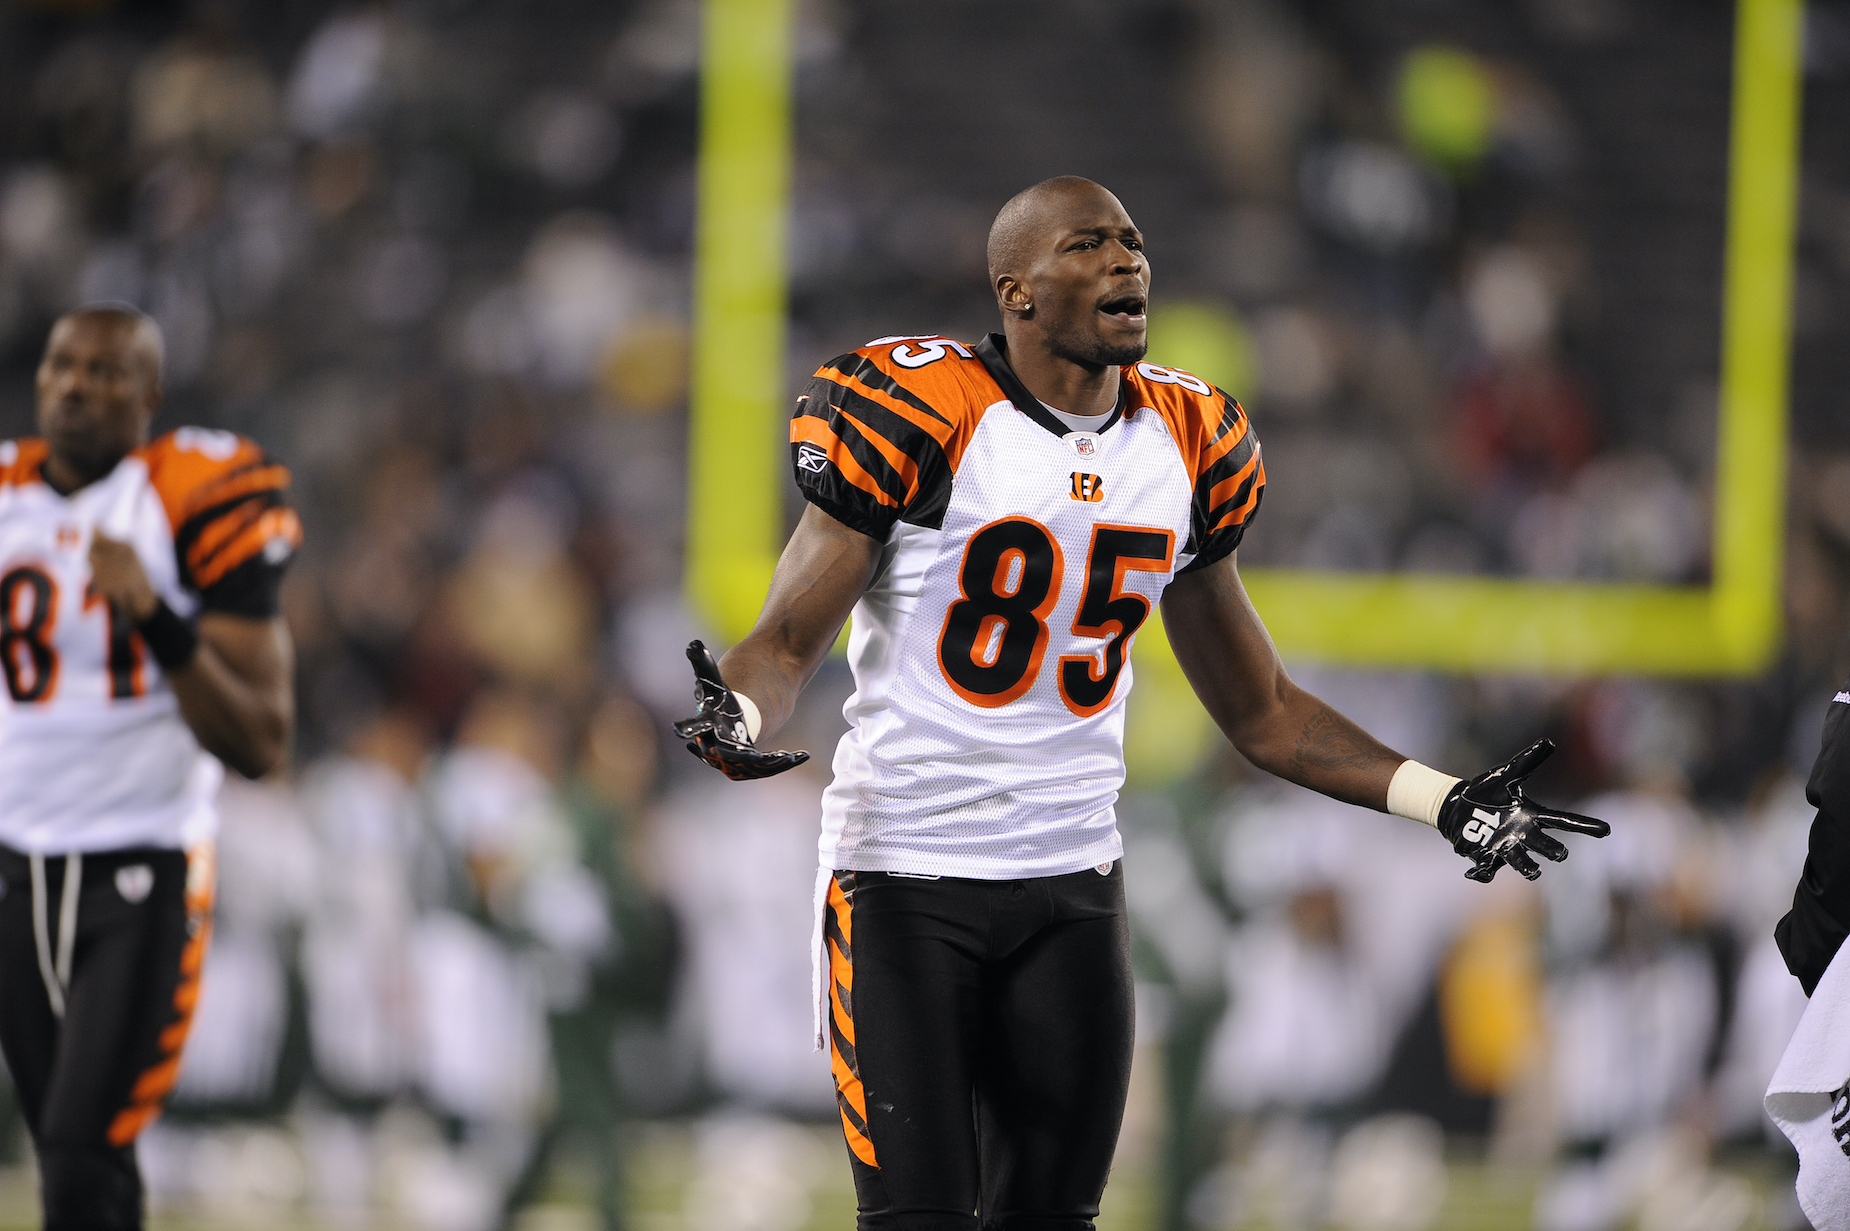 Chad Johnson made almost $50 million in the NFL, but says he's "been broke" since he was born.